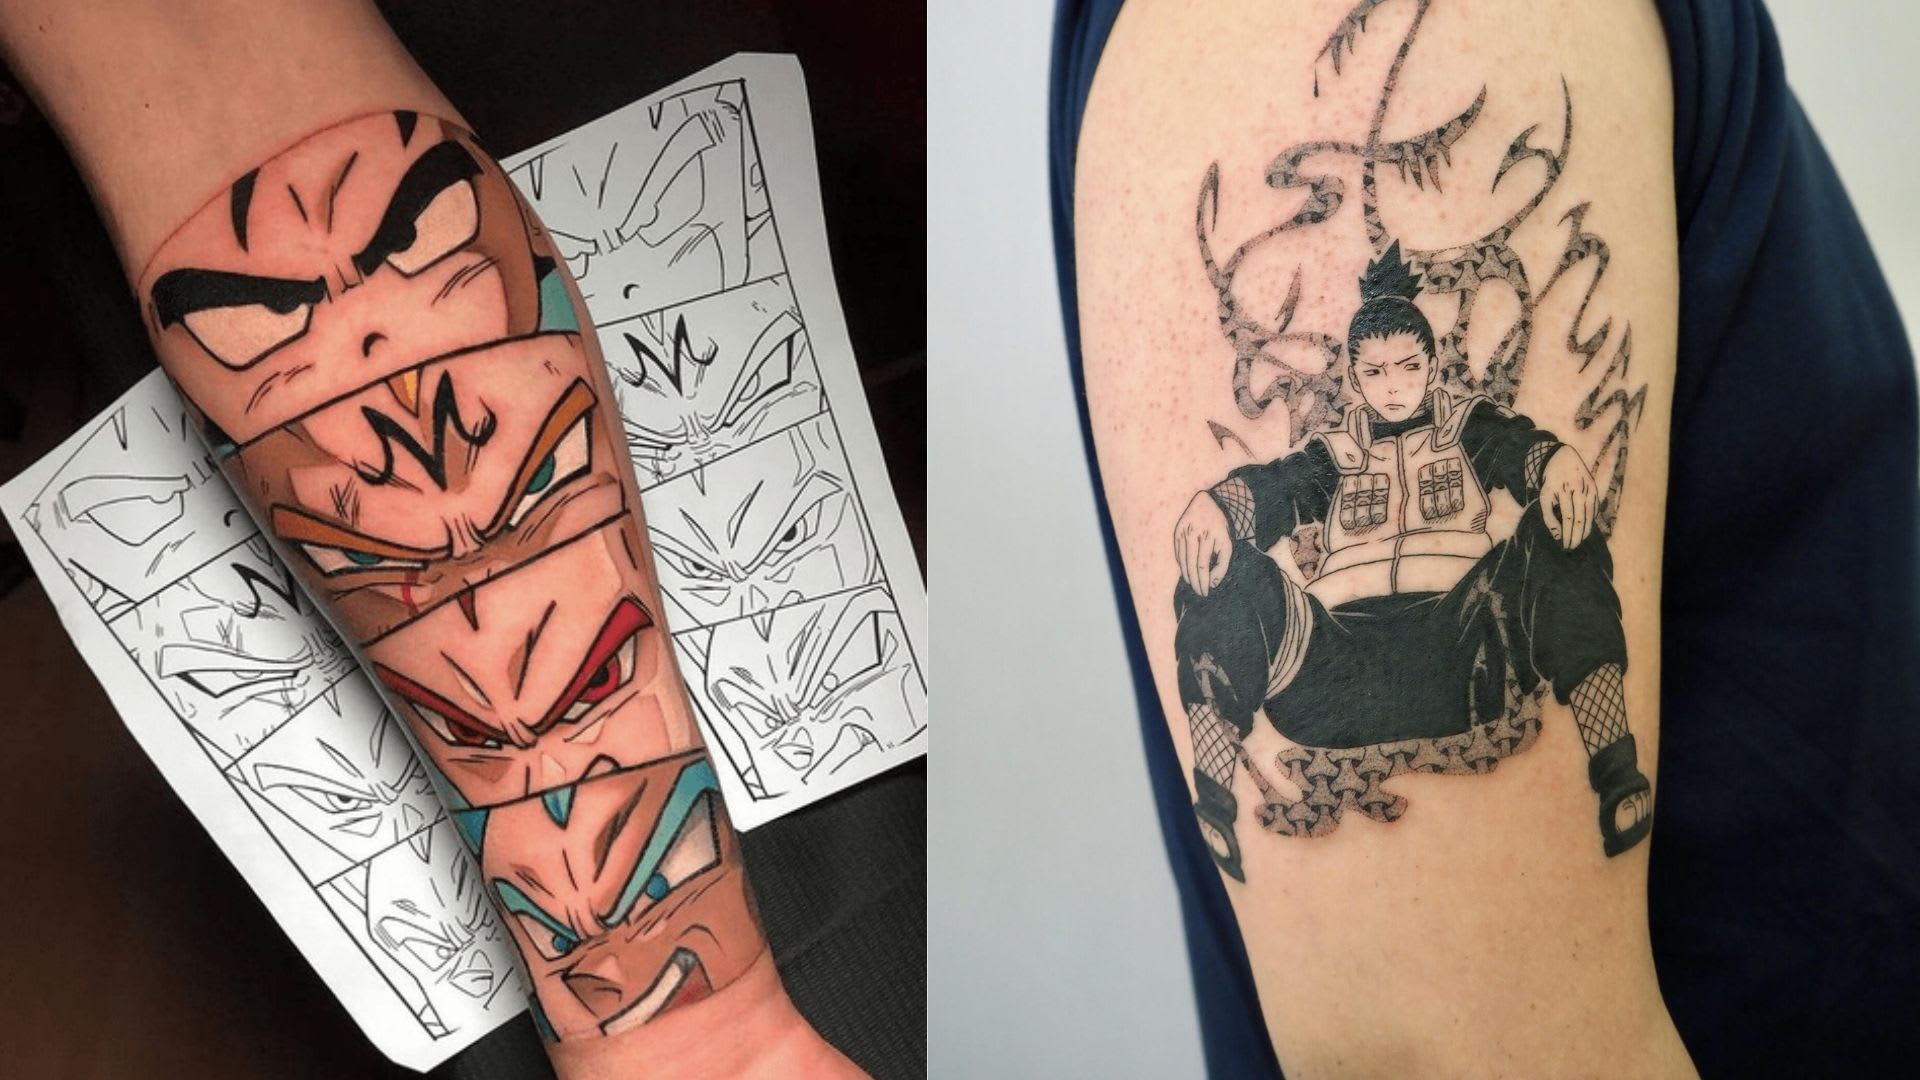 The 15 Best Anime Tattoo Ideas & Designs Fans Should Try